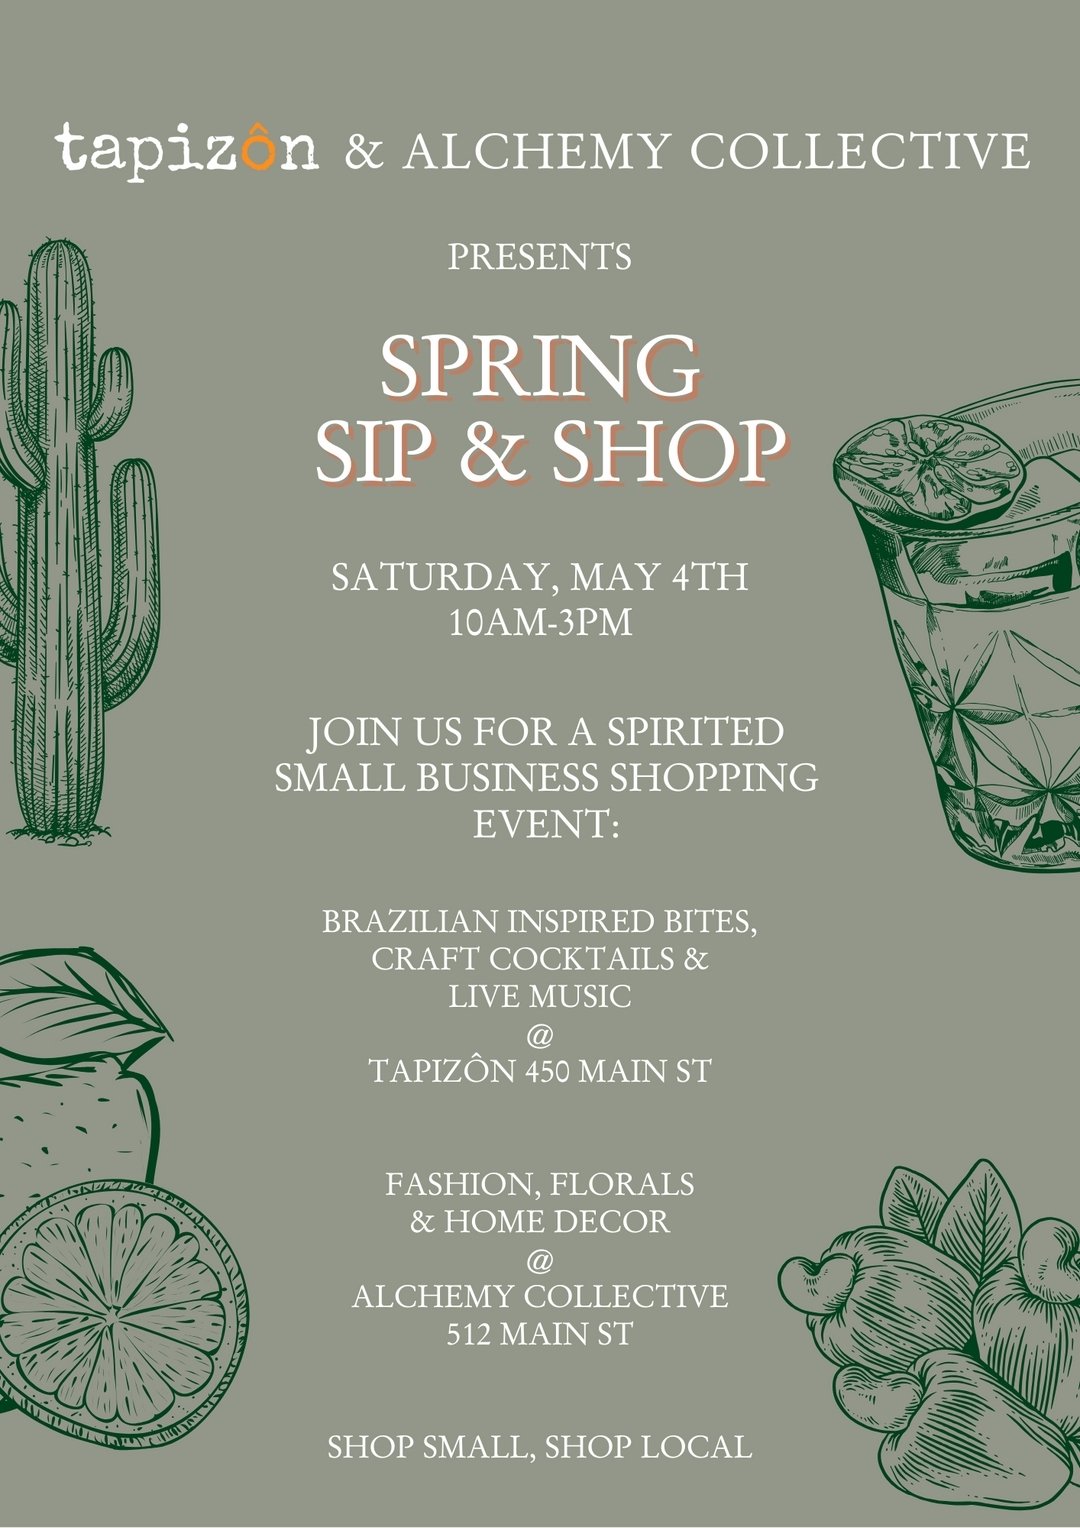 Come one, come all! We are thrilled to announce our first shopping event at our studio/shop in El Segundo! 

In advance of Mother's Day, we've partnered with one of our favorite local restaurants @tapizon.barkitchen for a fun filled day of shopping, 